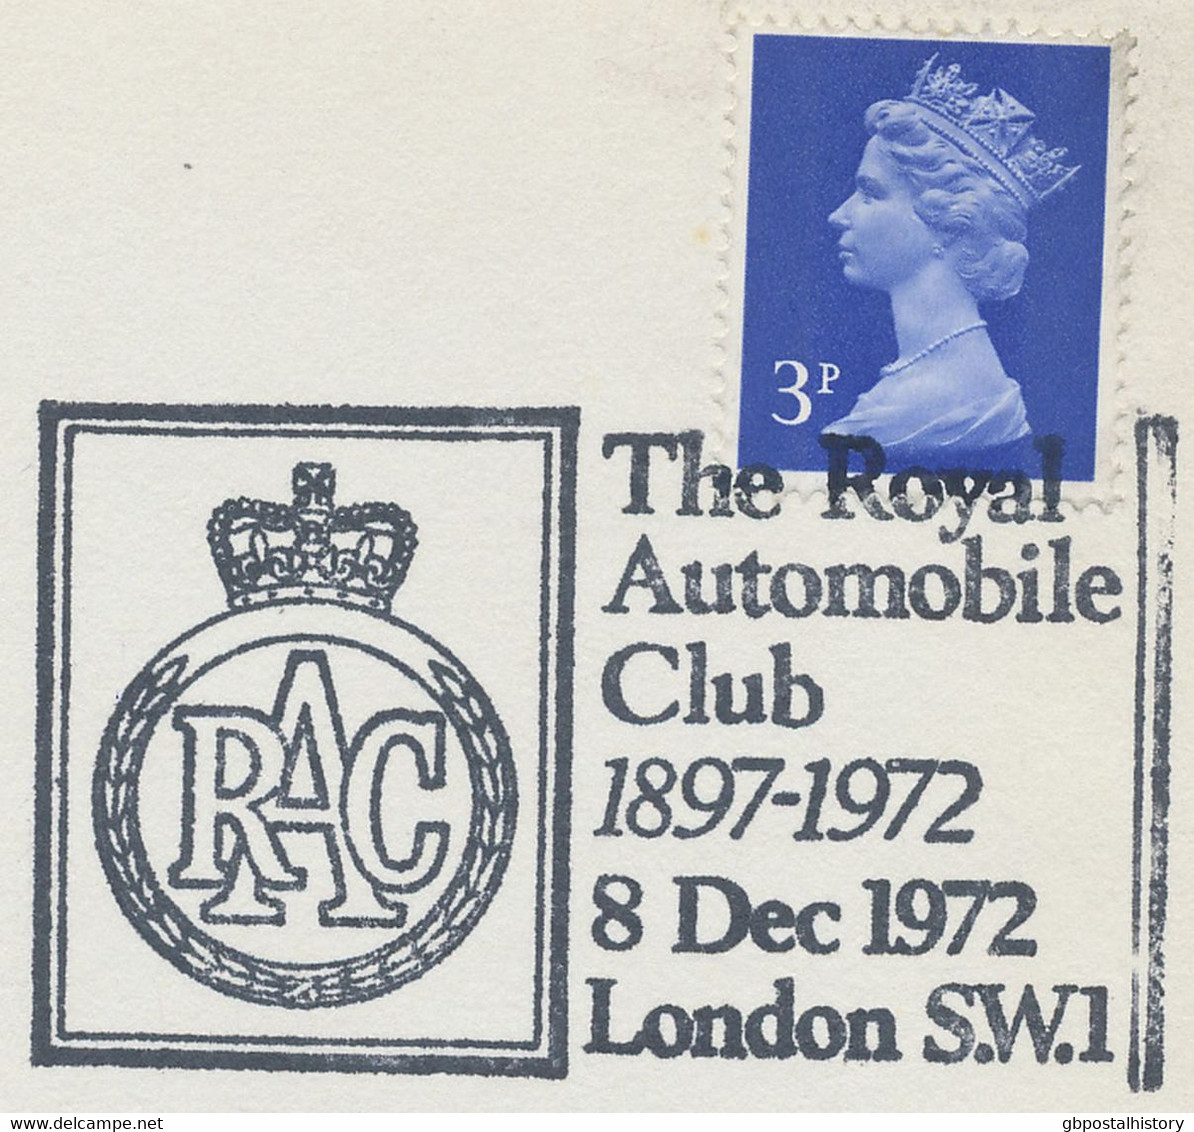 GB SPECIAL EVENT POSTMARKS RAC THE ROYAL AUTOMOBILE CLUB 1897-1972 LONDON S.W.1, 8.12.1972 - Storia Postale